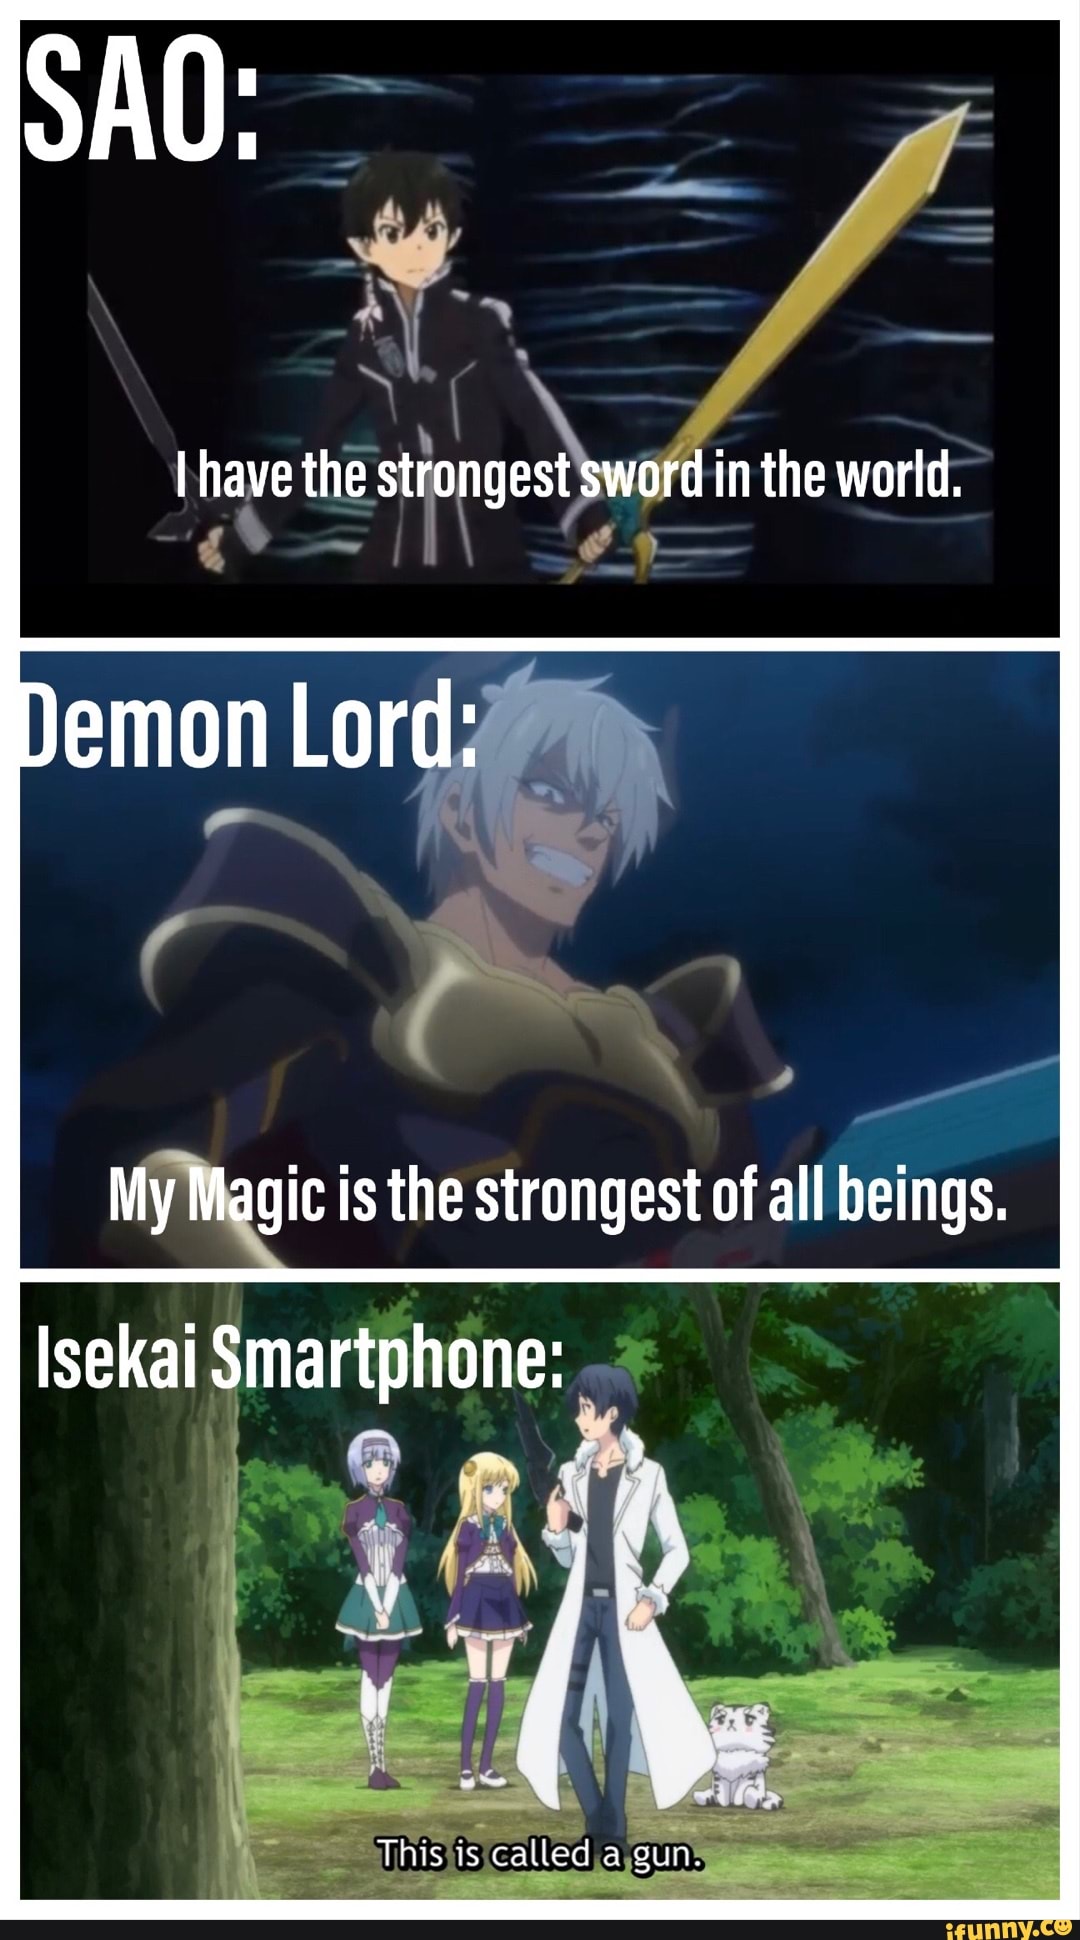 ISEKAI show but this time MC has sun battery in his smartphone, and he is  genius strategist supreme leader? Sounds interesting - 9GAG